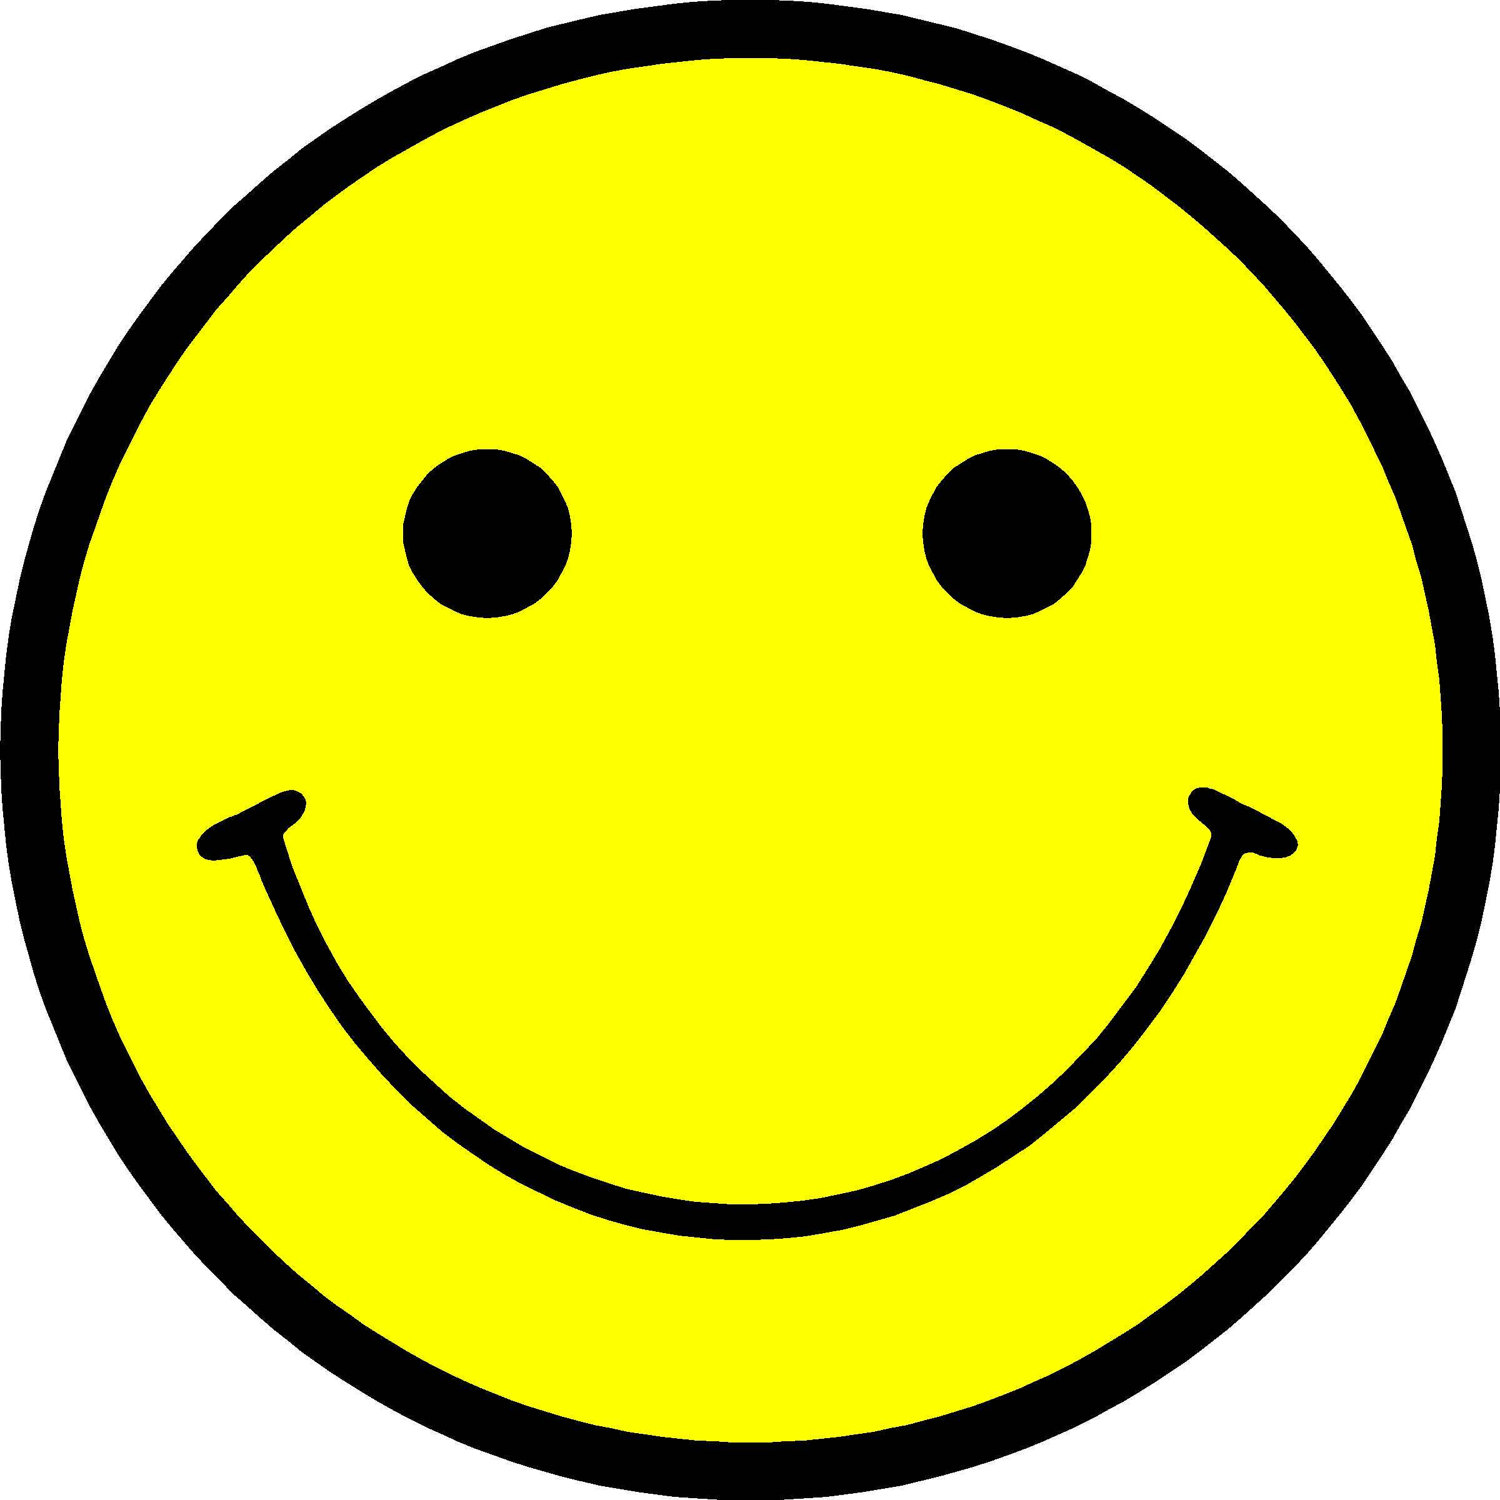 Smiley Face Vinyl Decal Sticker Adhesive in 4 inch size